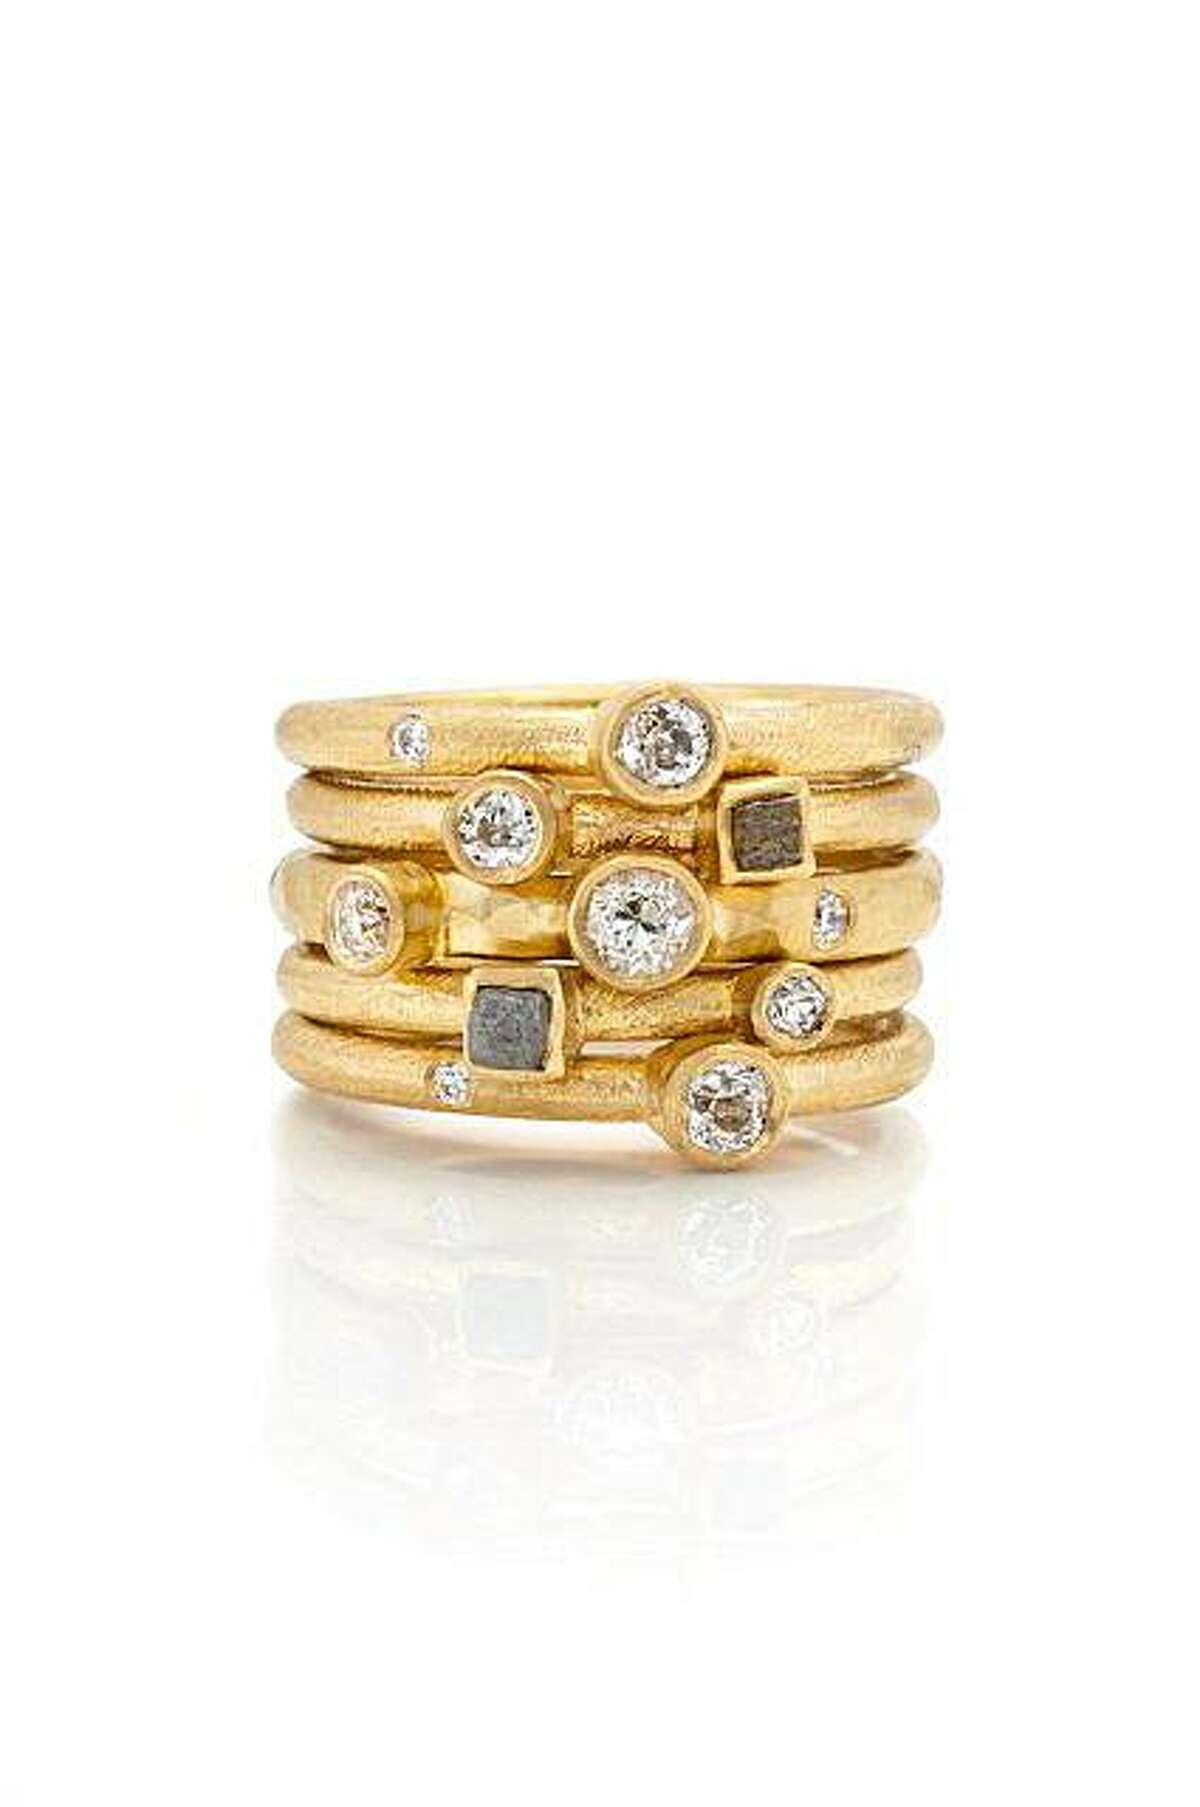 A stack of rough diamond rings by April Higashi of Berkeley.